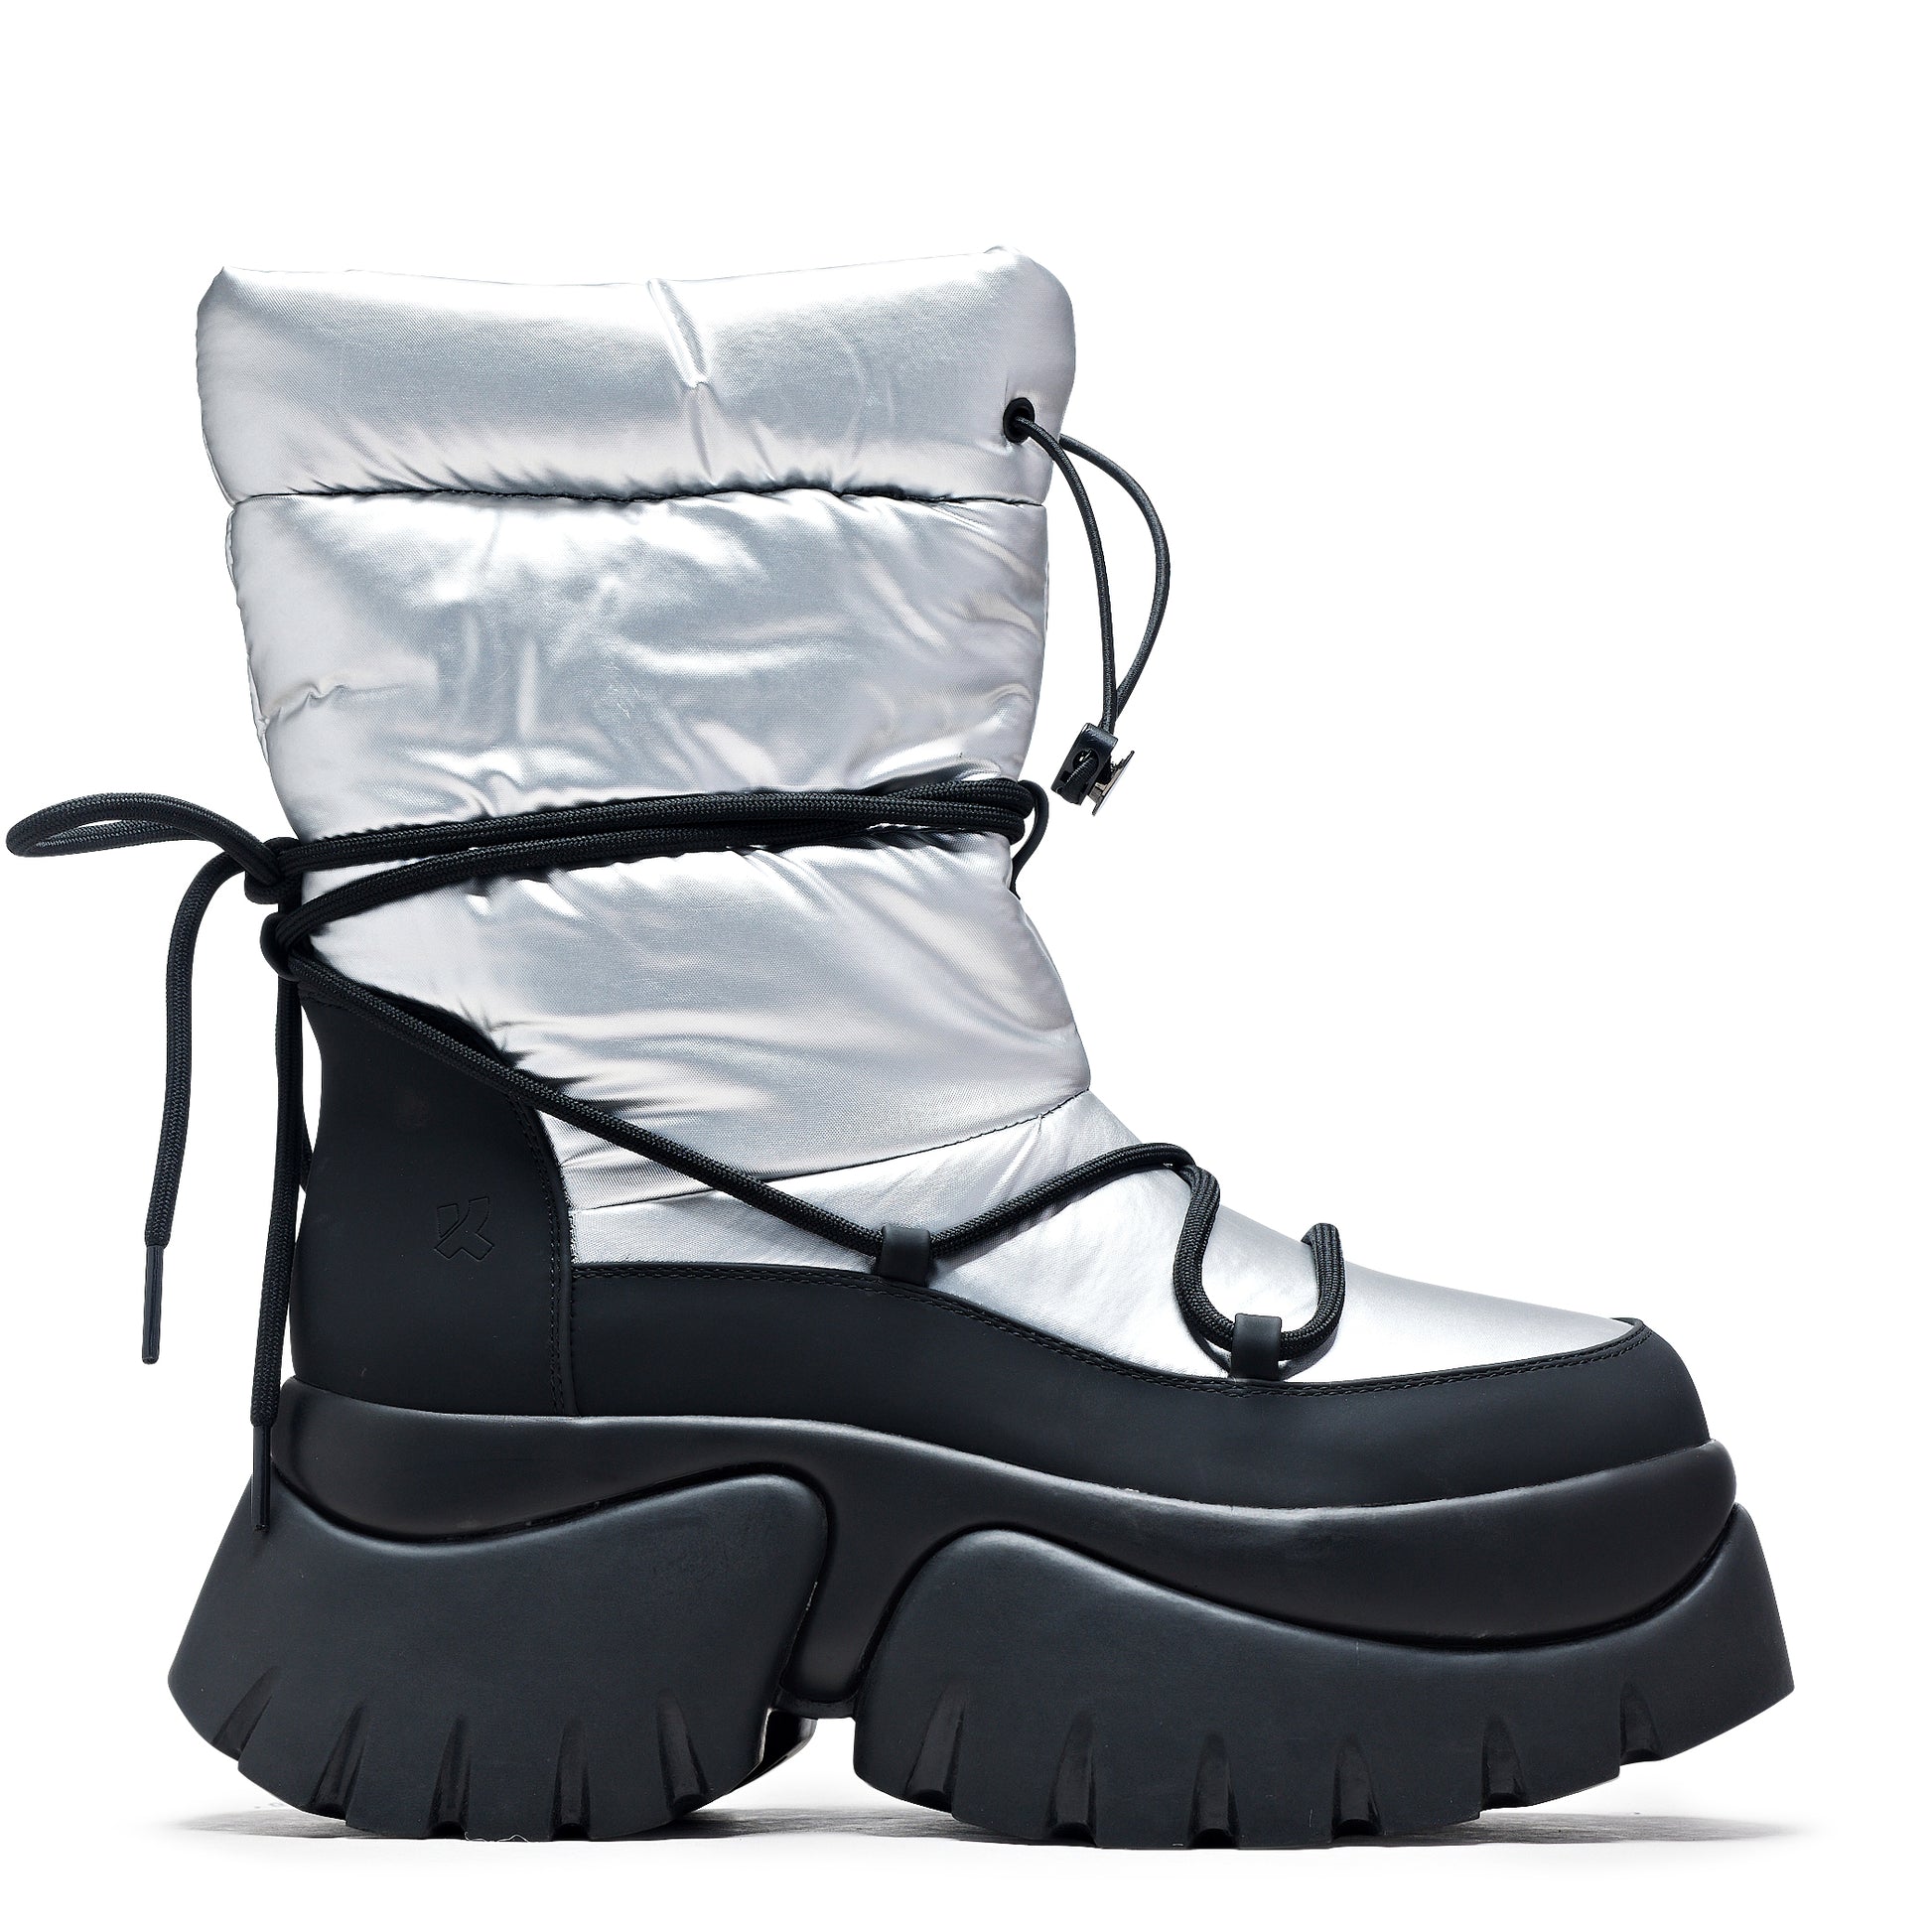 A Glass Mirage Snow Boots - Steel - Ankle Boots - KOI Footwear - Silver - Side View